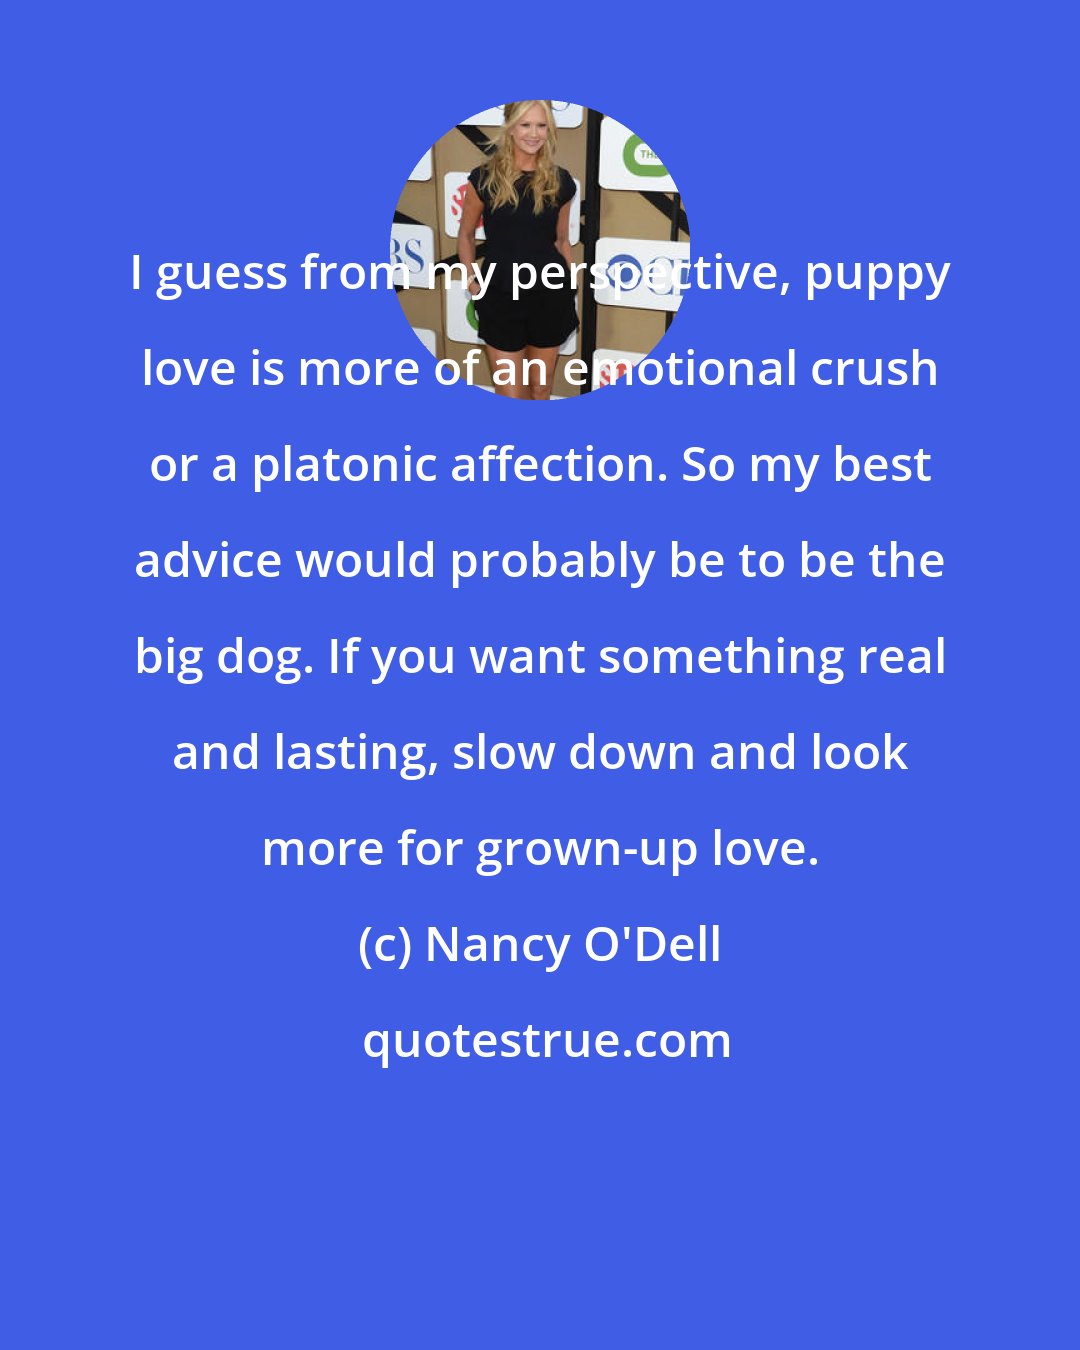 Nancy O'Dell: I guess from my perspective, puppy love is more of an emotional crush or a platonic affection. So my best advice would probably be to be the big dog. If you want something real and lasting, slow down and look more for grown-up love.